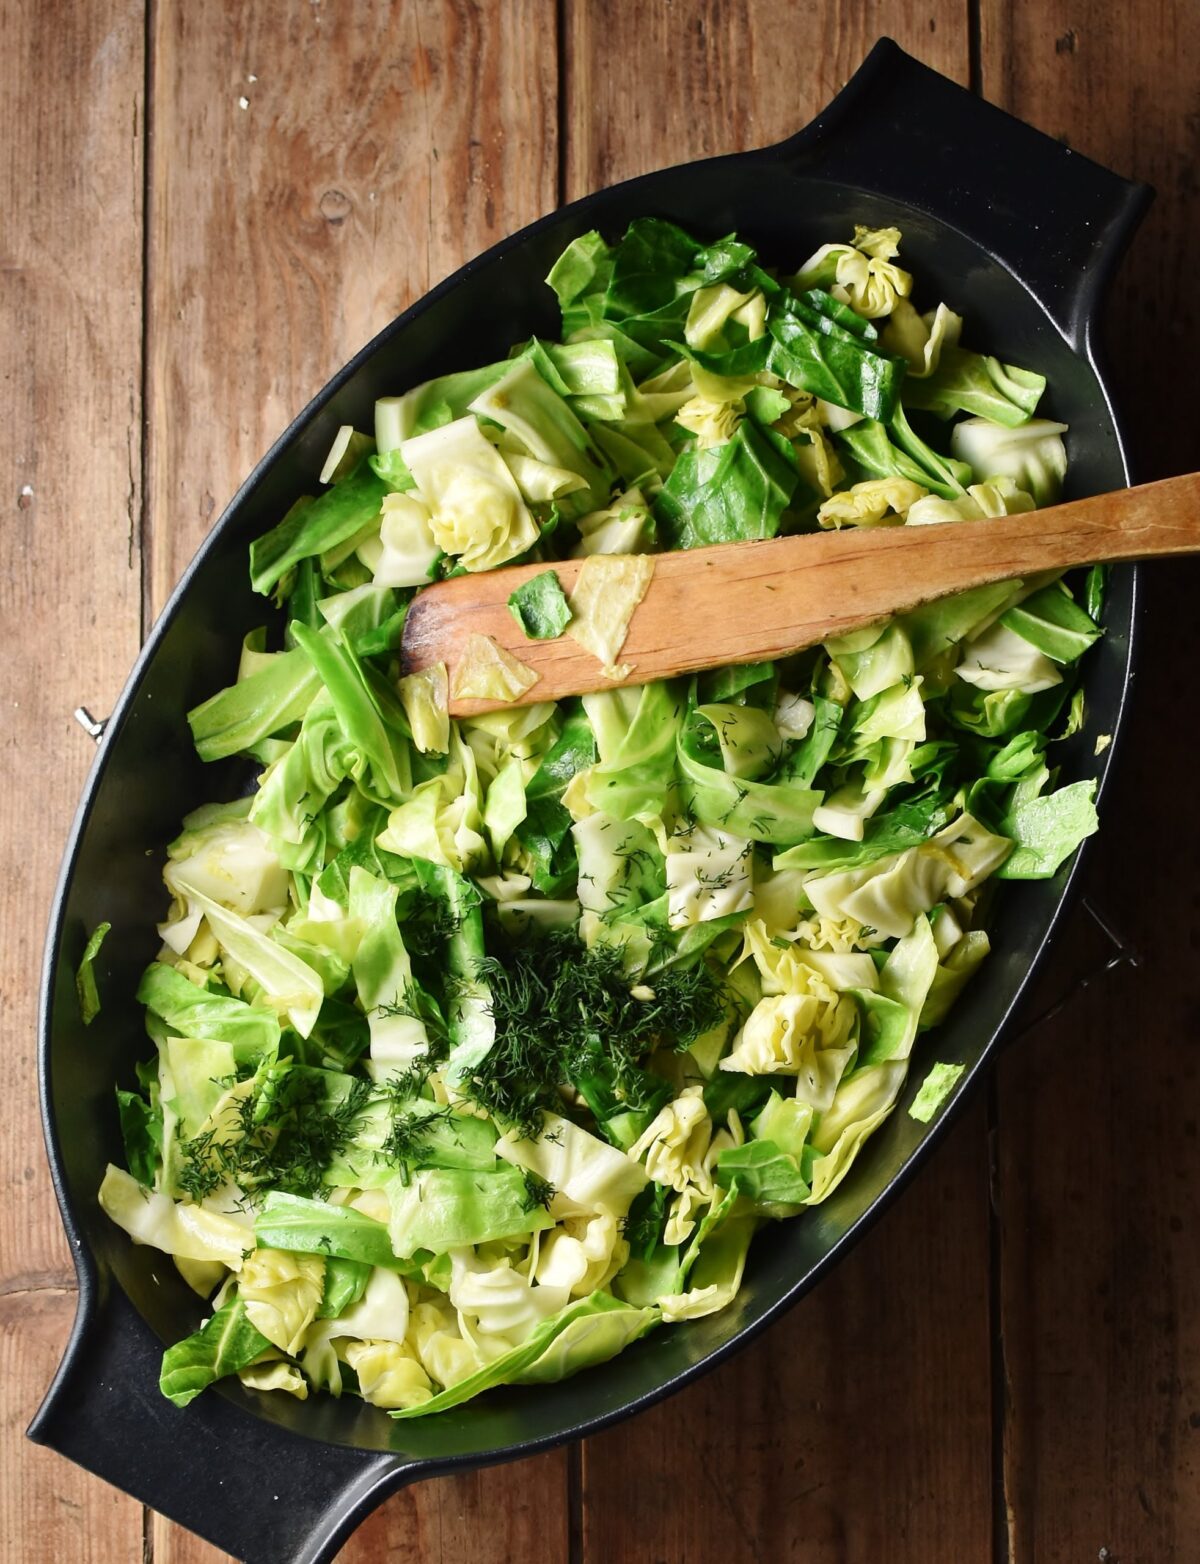 Chopped cabbage in black oval dish with wooden spoon.